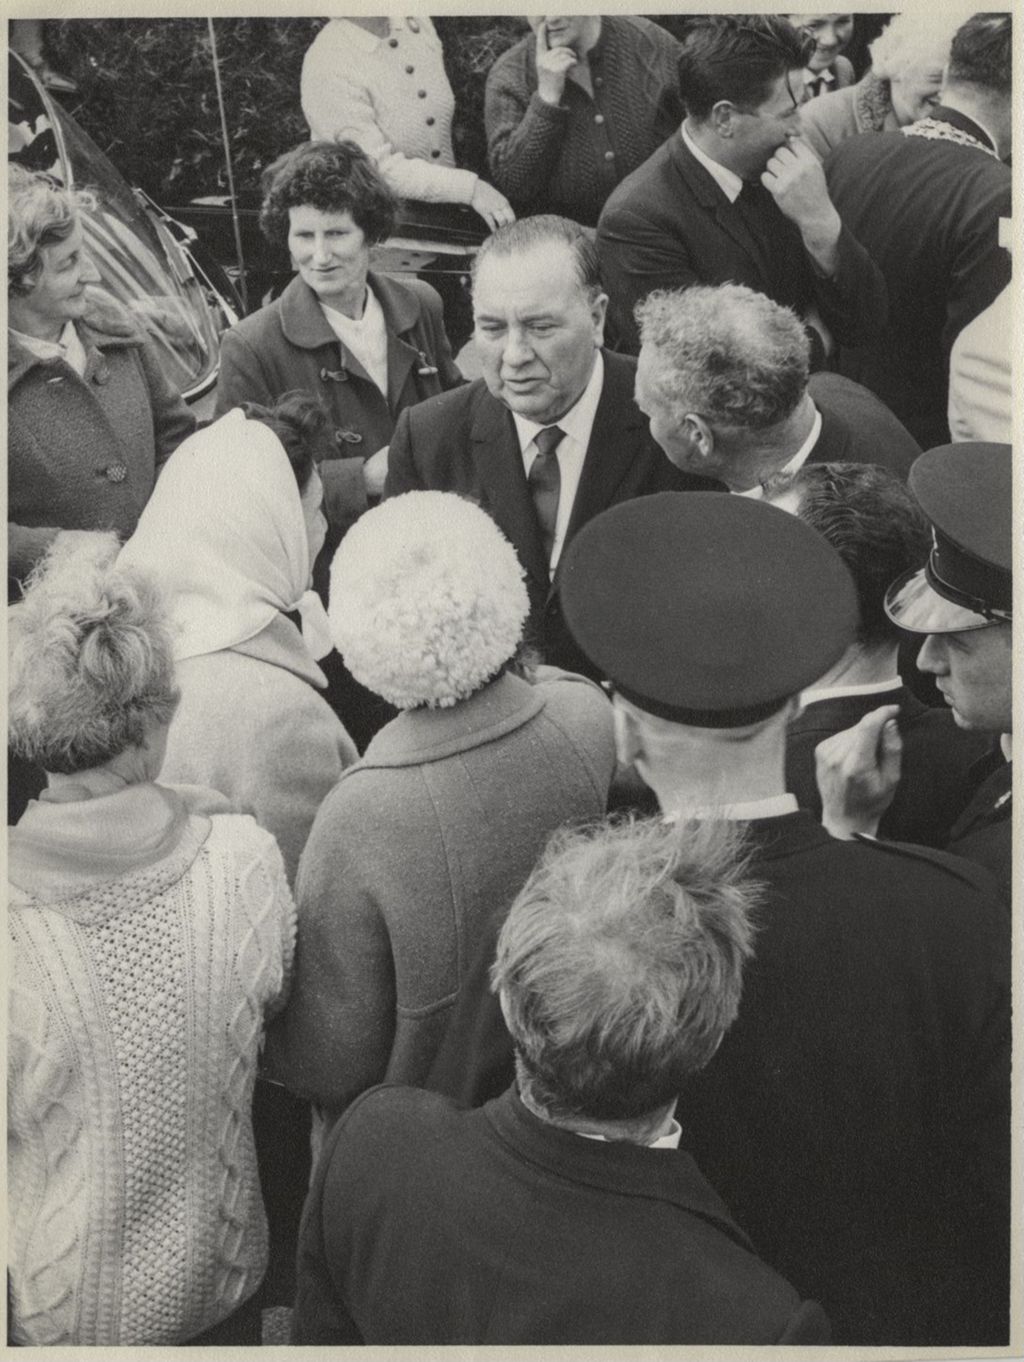 Miniature of Trip to Ireland, Richard J. Daley in a crowd